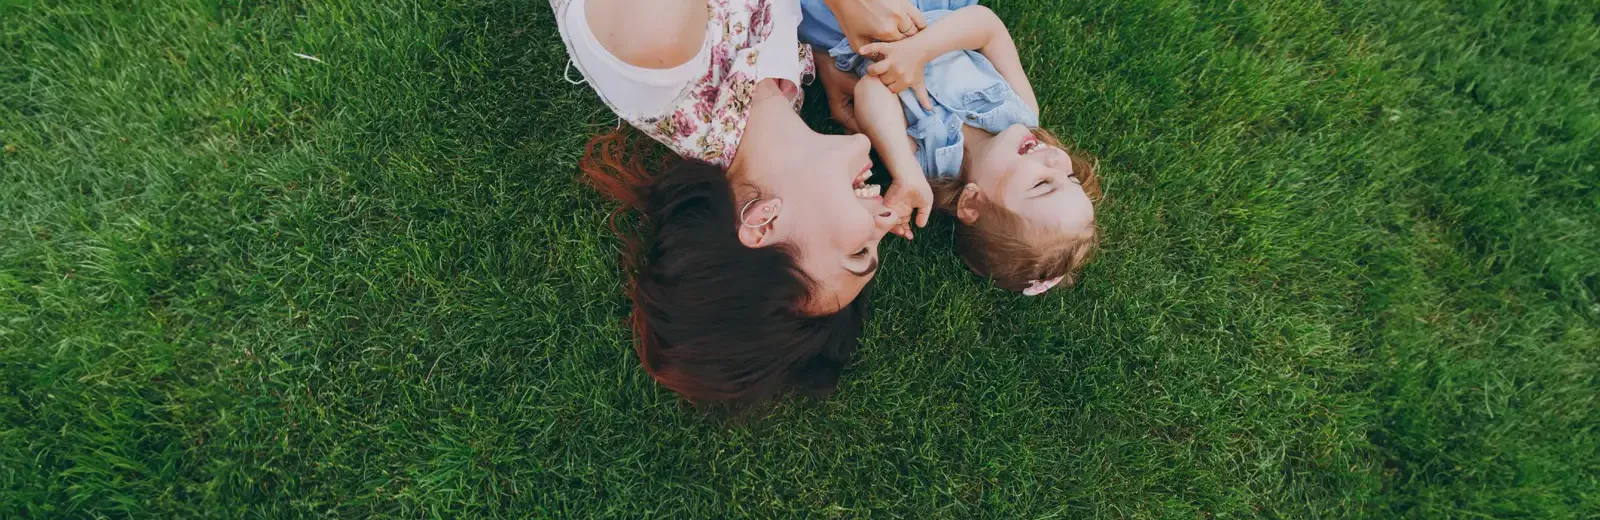 mother daughter laughing laying on lawn